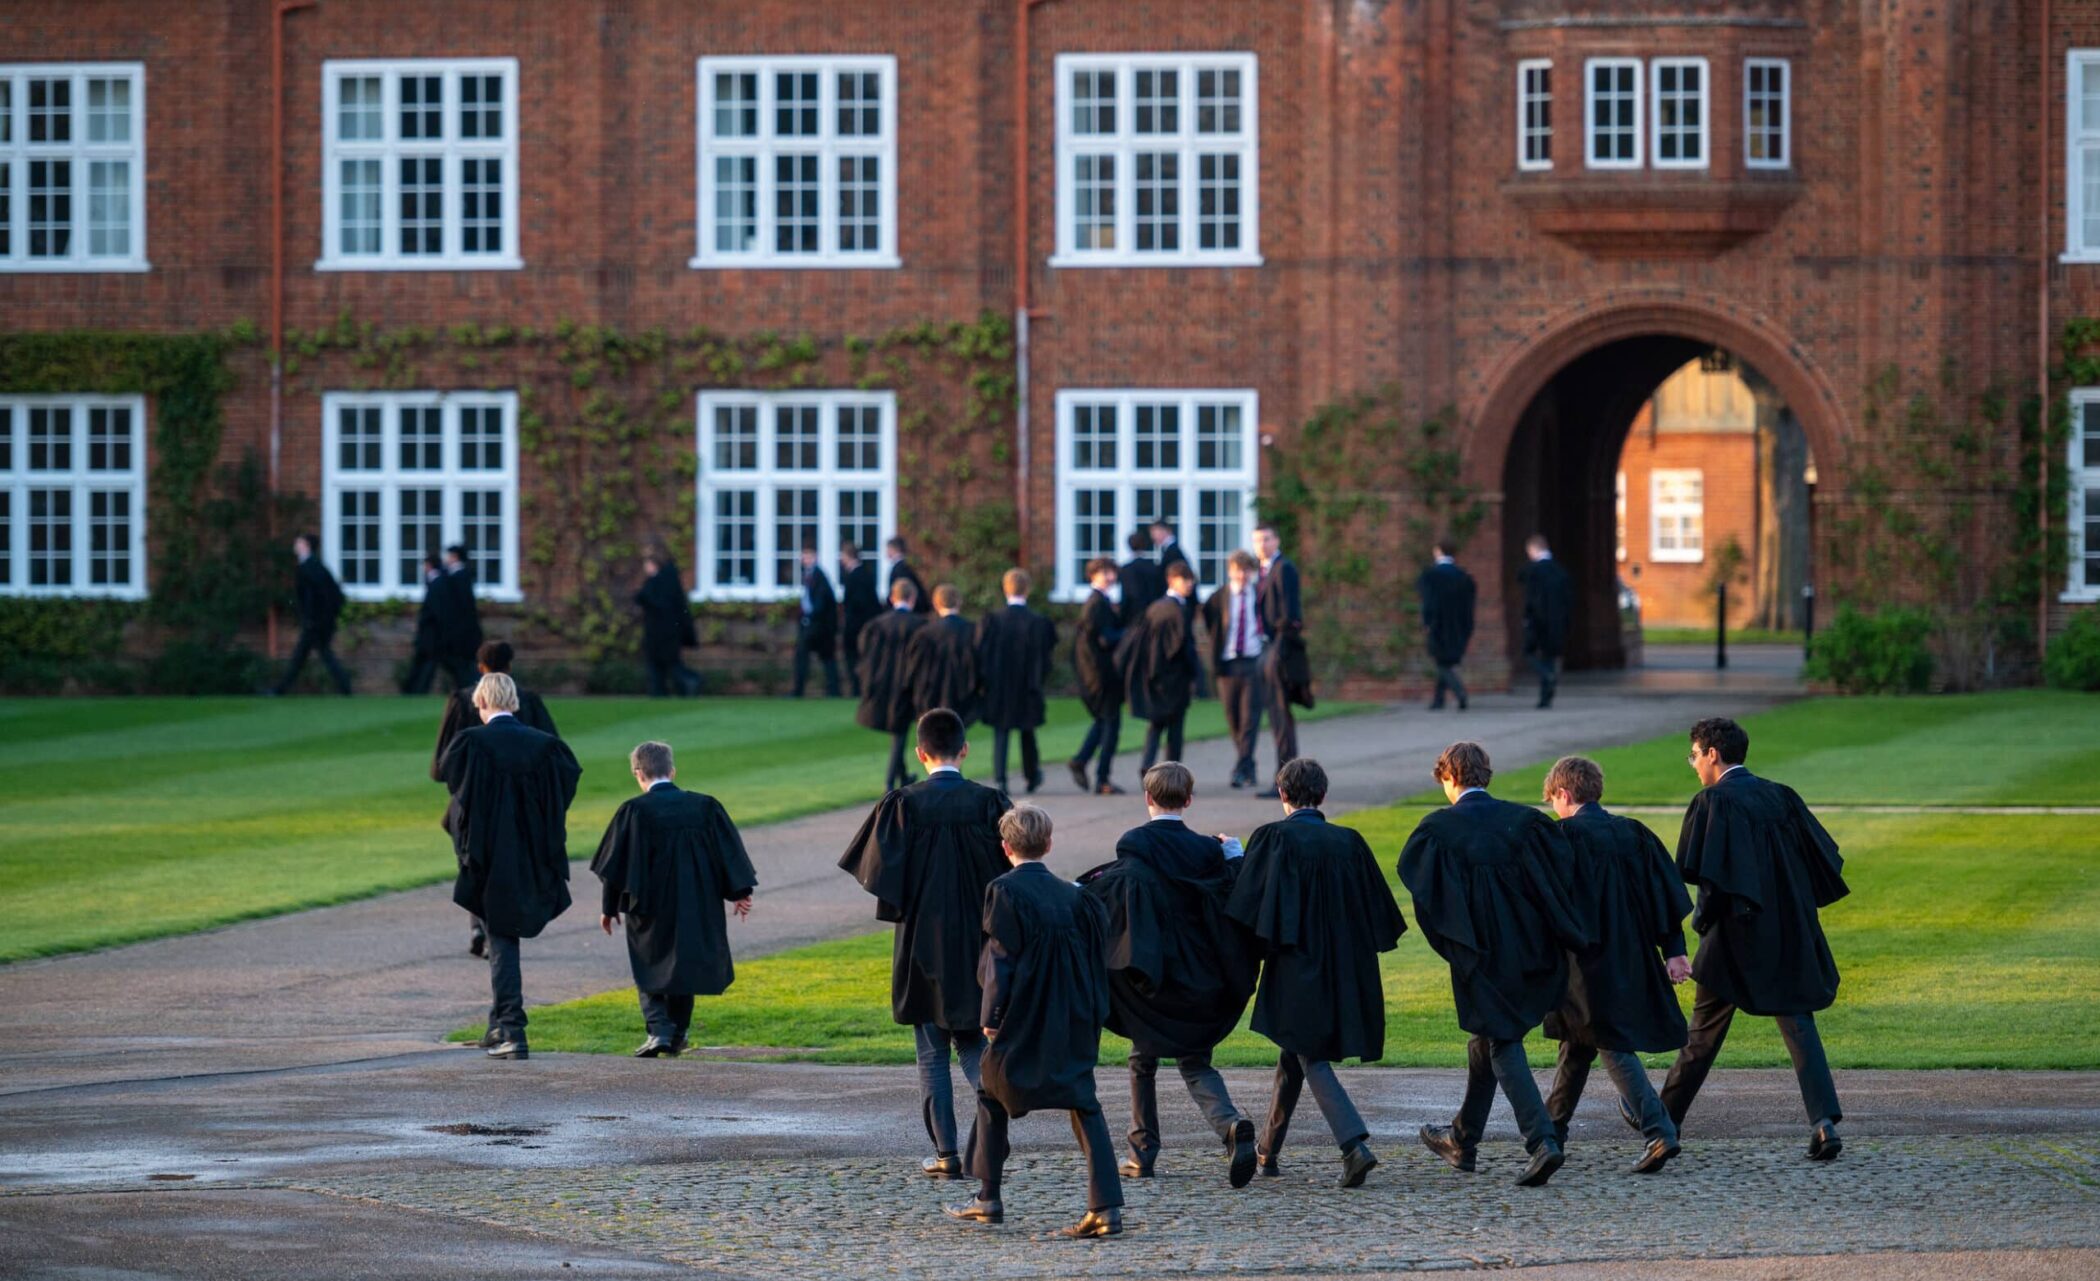 Boys in gowns walking through the grounds of Radley College in Oxfordshire